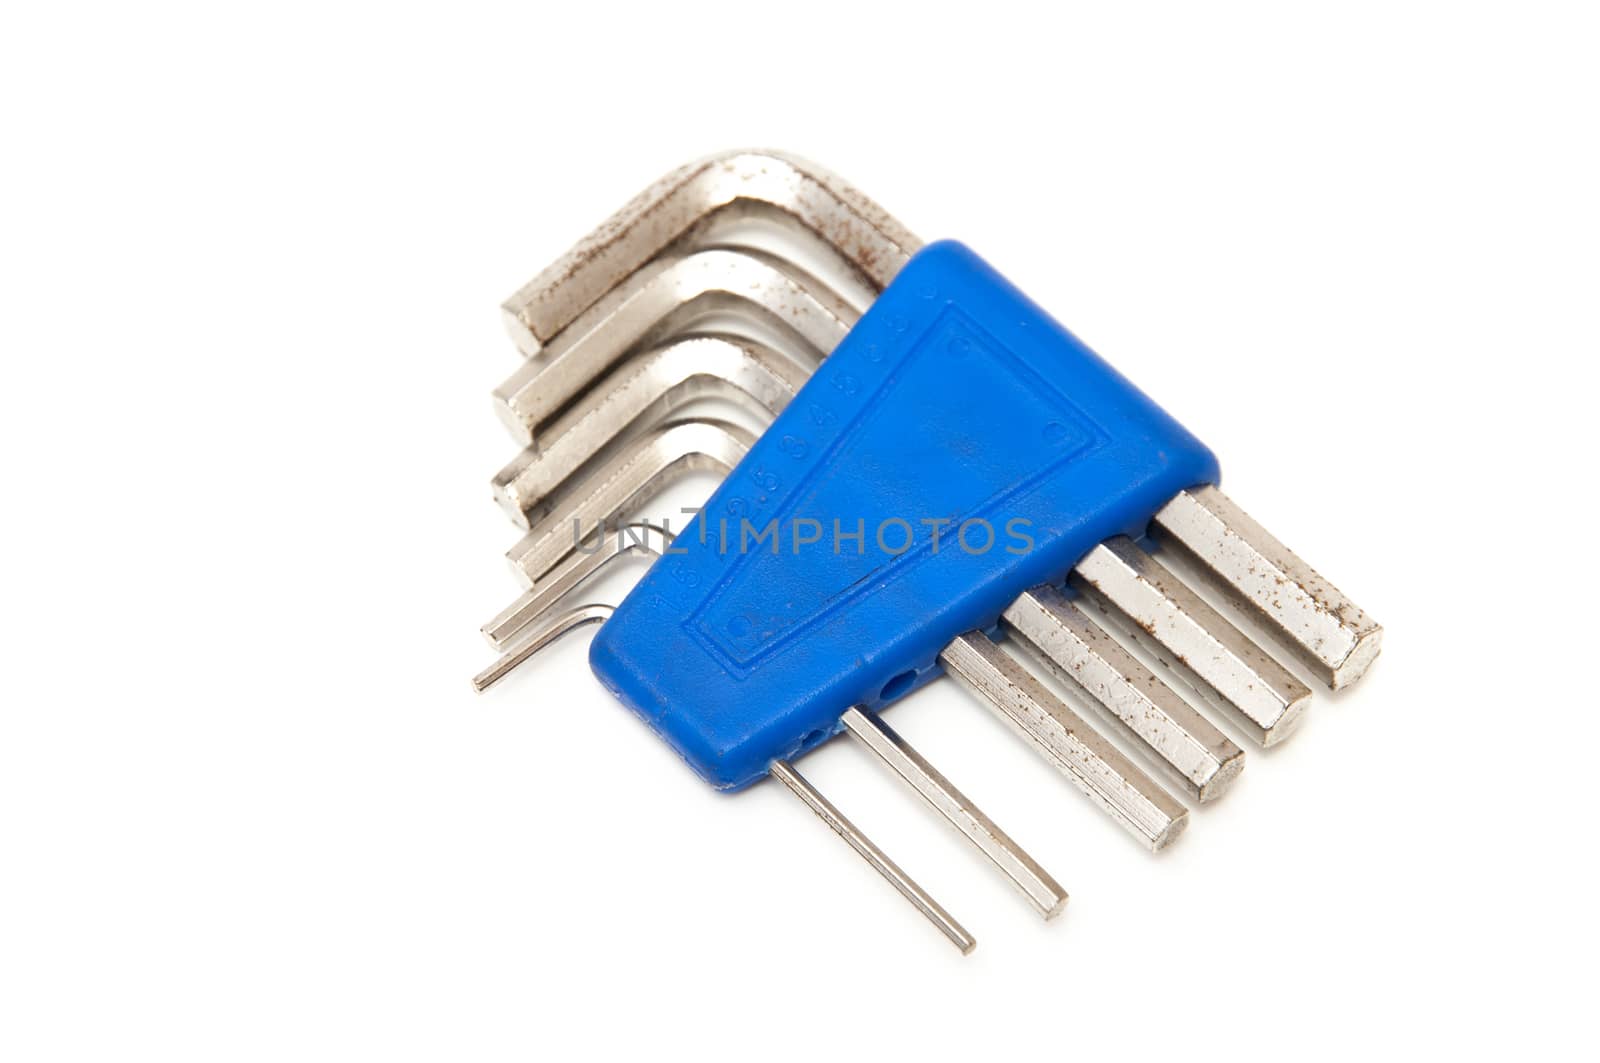 industrial tools on a white background